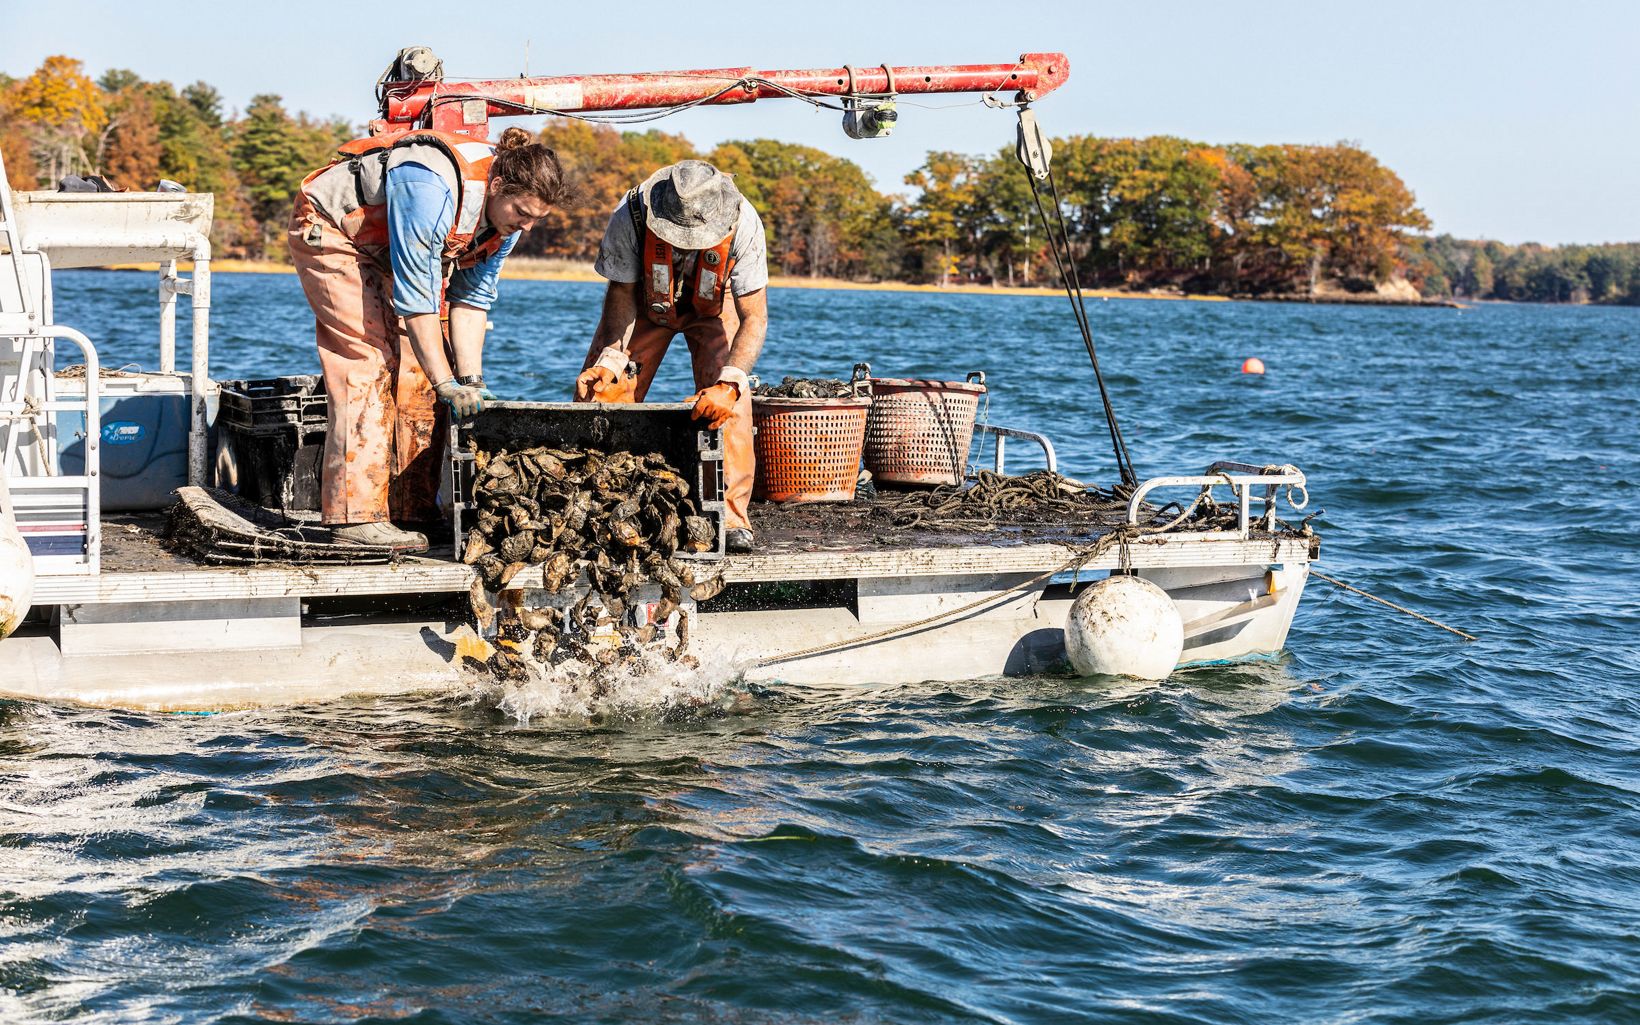 Oyster Restoration Brian Gennaco (right) of the Virgin Oyster Company and an employee add oysters to a restoration reef as part of the Supporting Oyster Aquaculture and Restoration (SOAR) program. Great Bay in Durham, New Hampshire. © 2020 Jerry and Marcy Monkman/EcoPhotography